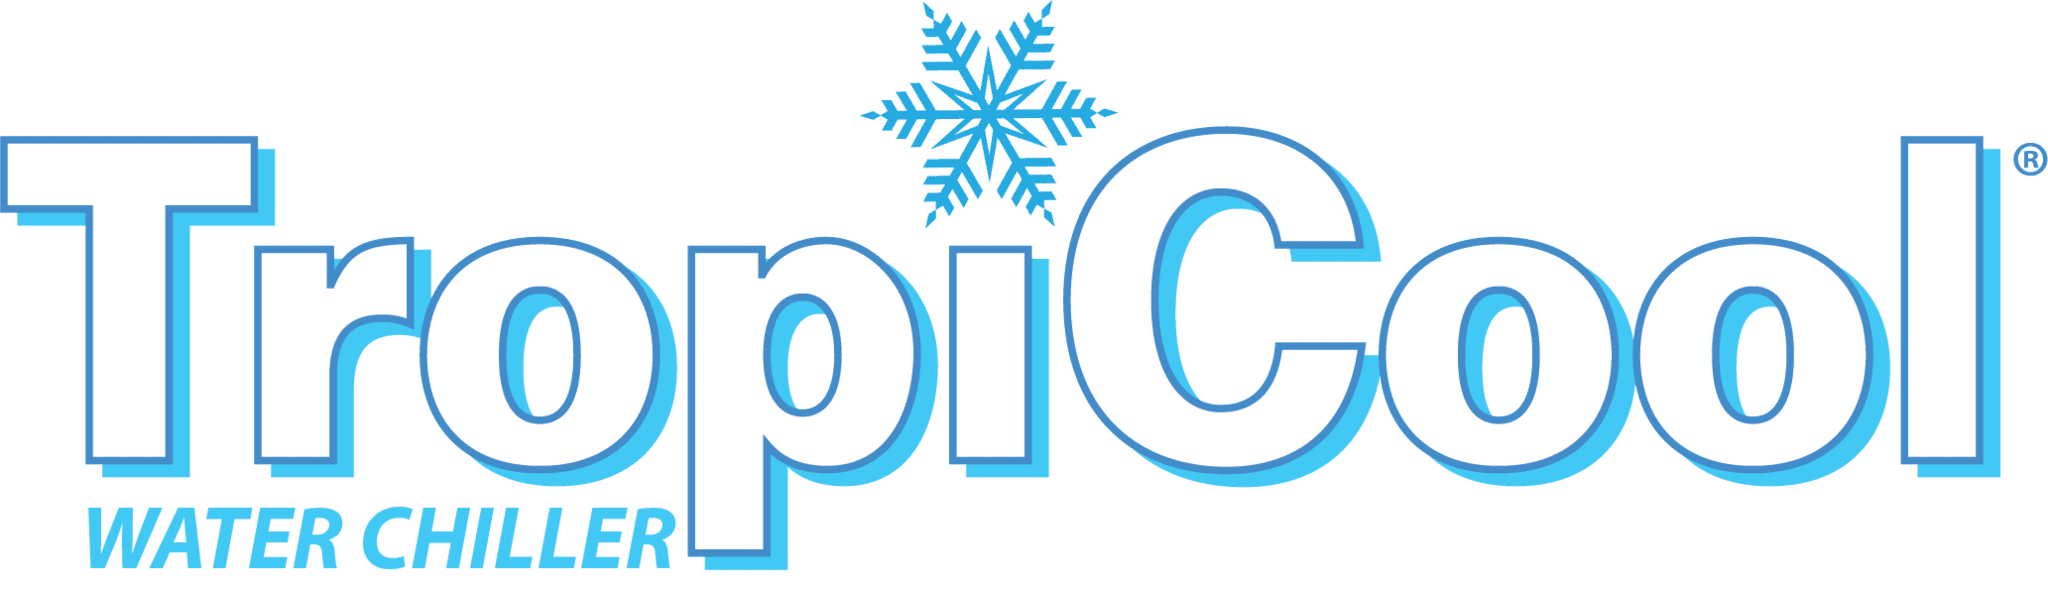 A picture of the word pic with a snowflake on it.